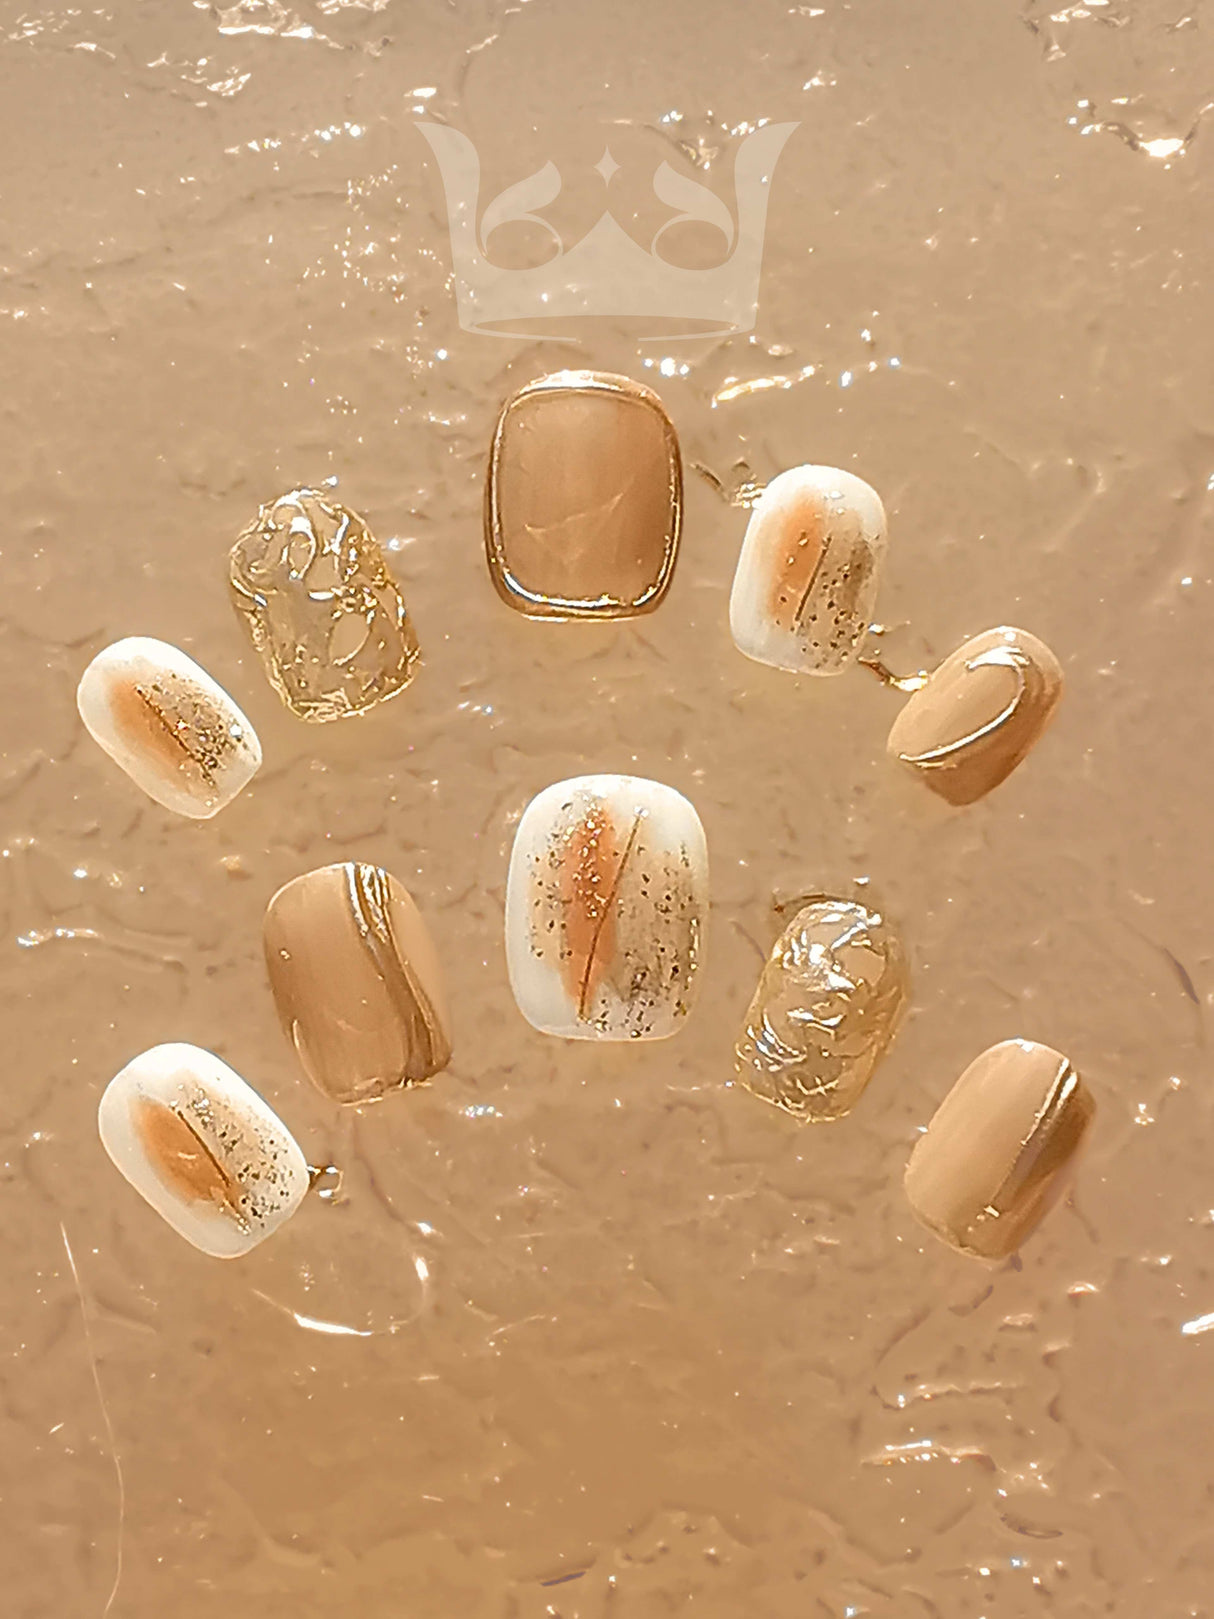 These press-on nails offer a stylish and fancy look with modern designs including a neutral color palette, marble effect, glitter accents, and metallic stripe.